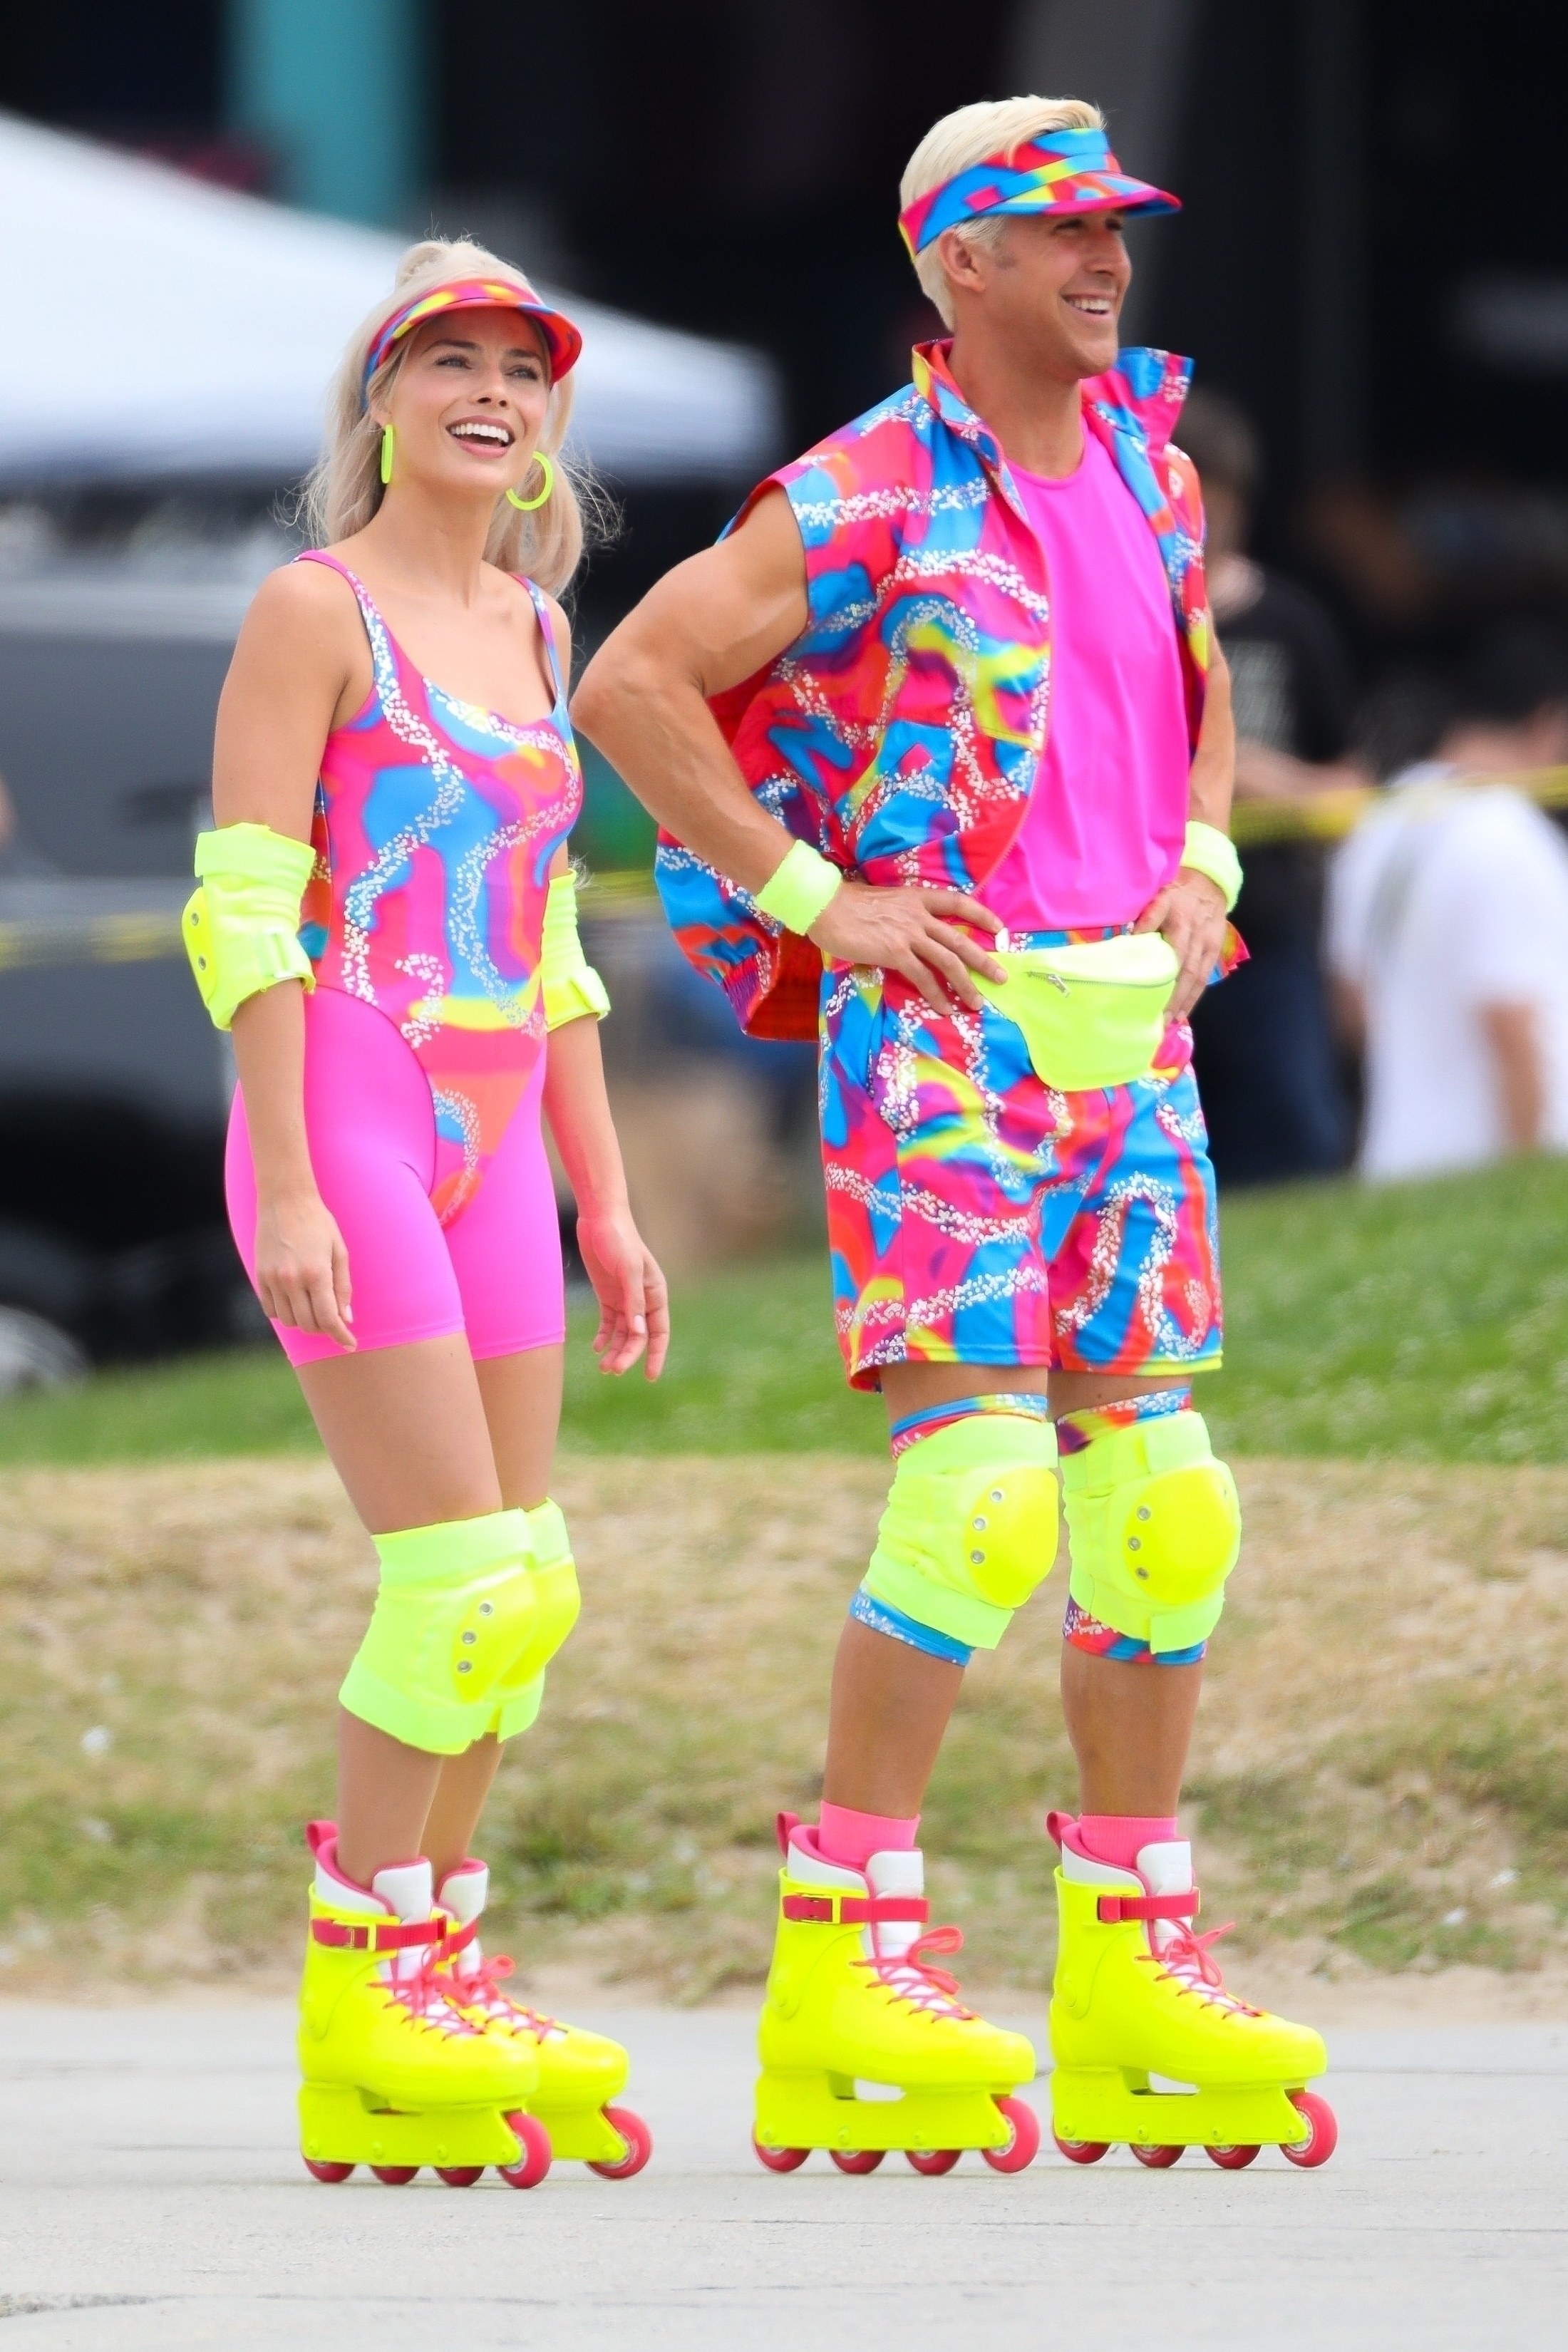 Margot Robbie and Ryan Gosling share a laugh as they film a rollerblading scene for &#x27;Barbie&#x27; in Venice Beach in very bright and colorful neon attire.